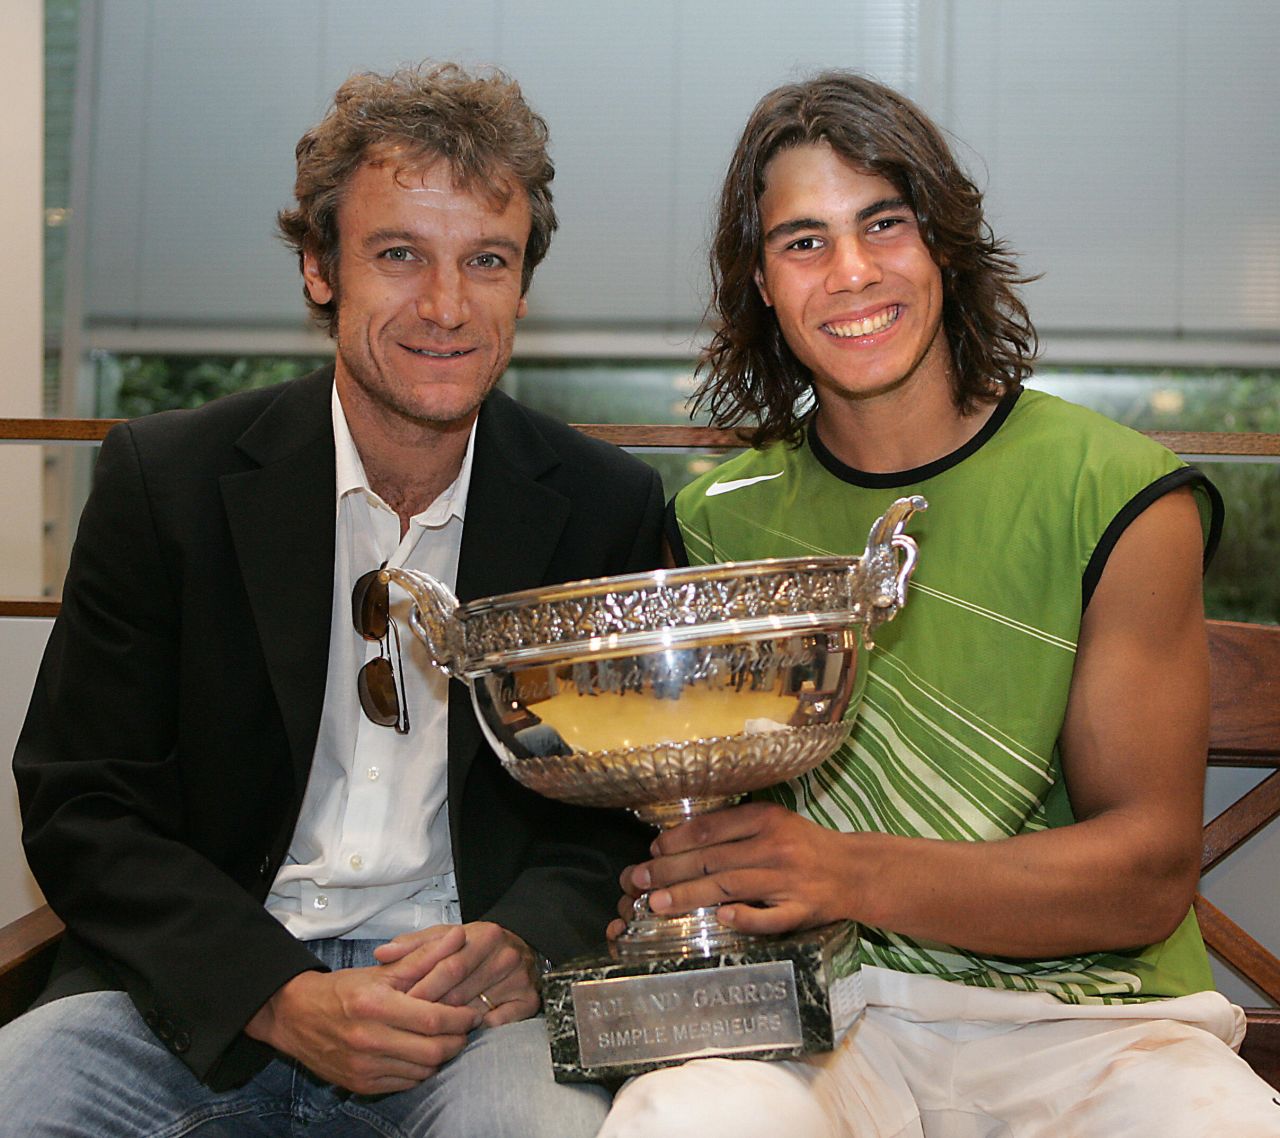 Teenage champions have become a rarity in recent years as players have become more focused on every aspect of the sport including food and conditioning. The last teenager to win a major was Rafael Nadal at the 2005 French Open when he was 19 years old. Here he is holding the winner's trophy that year alongside former Roland Garros champion Mats Wilander.